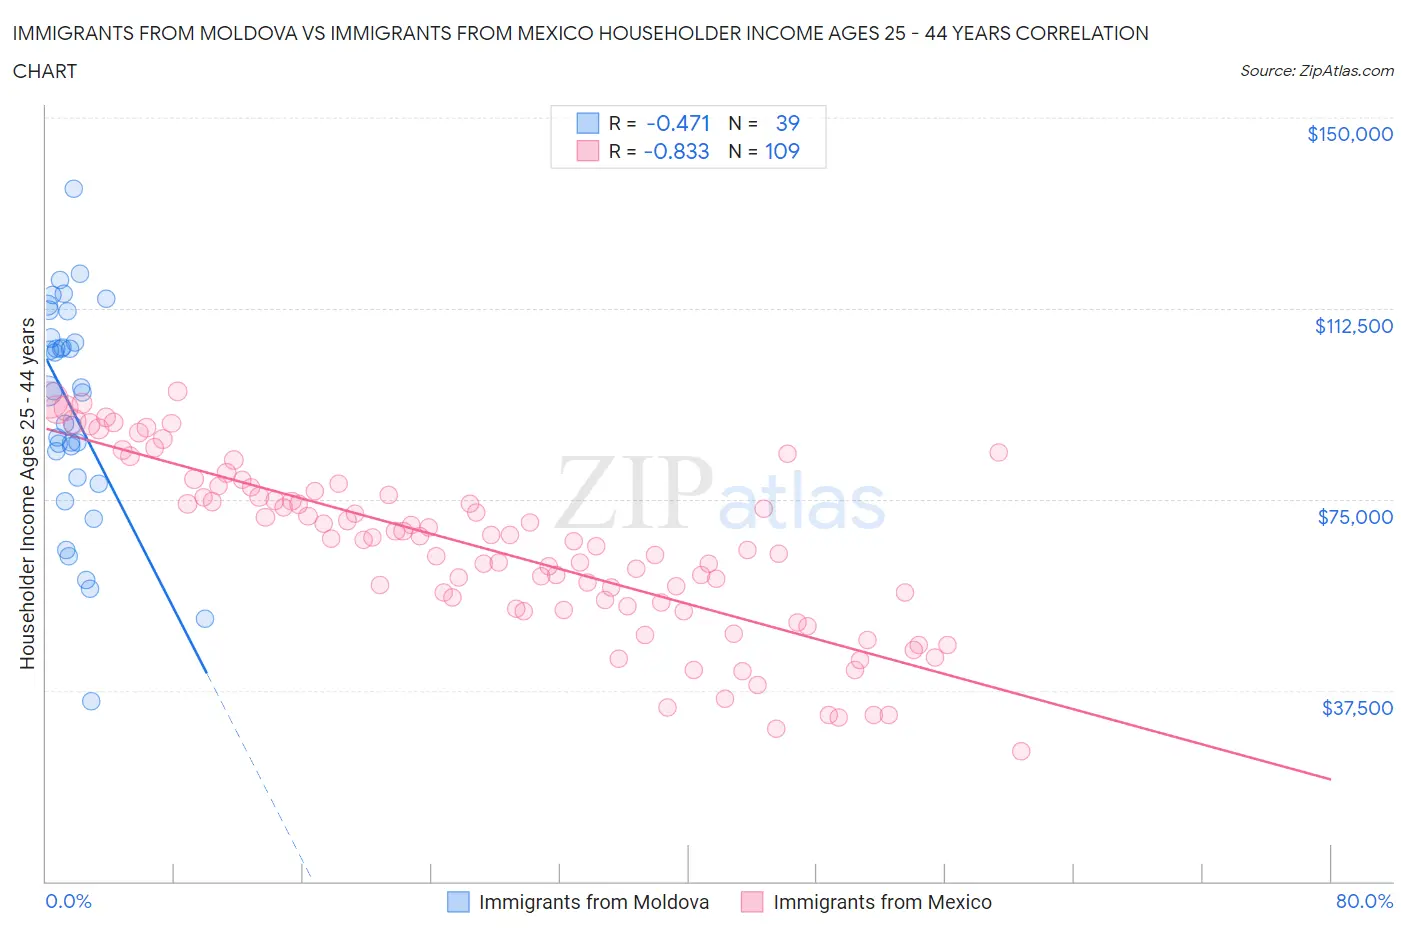 Immigrants from Moldova vs Immigrants from Mexico Householder Income Ages 25 - 44 years